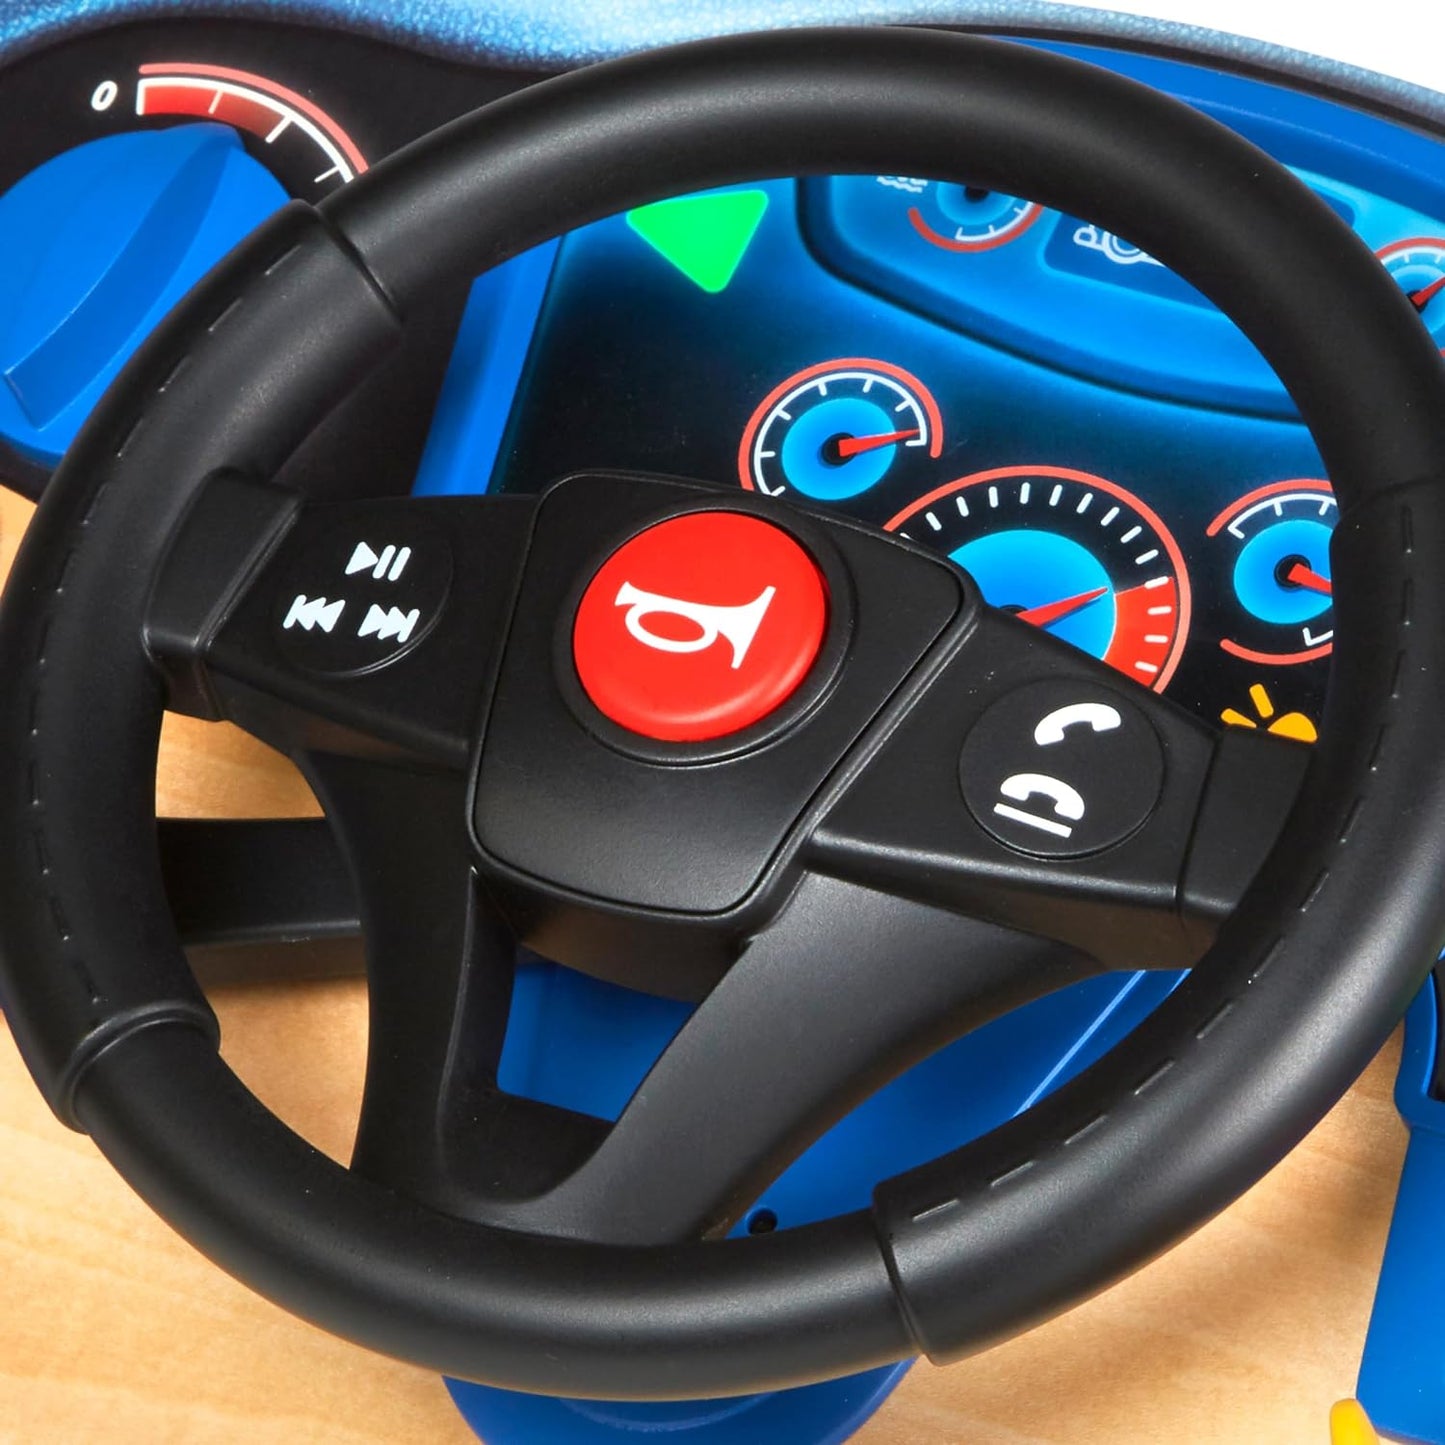 Melissa & Doug Vroom & Zoom Interactive Wooden Dashboard Steering Wheel Pretend Play Driving Toy - Kids Activity Board, Toddler Sensory Toys For Ages 3+